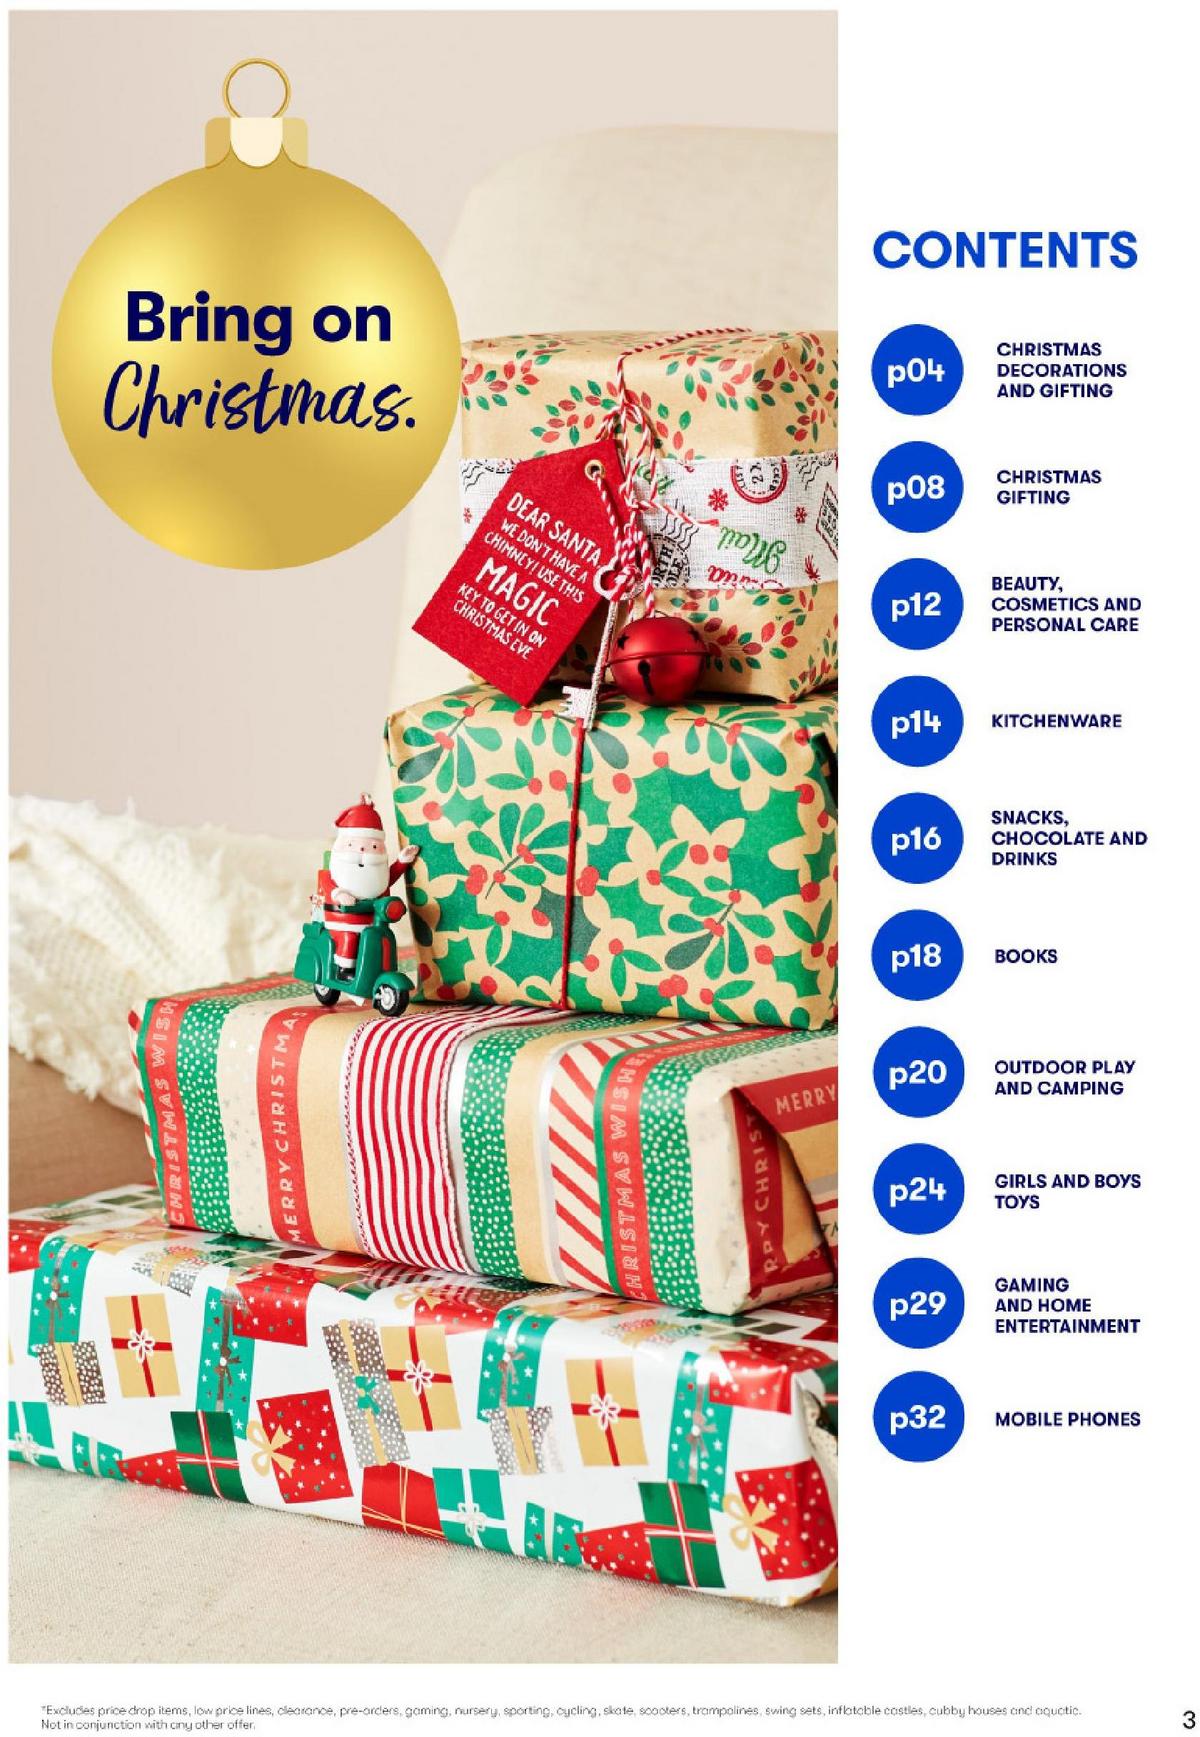 Big W Catalogues from 3 December